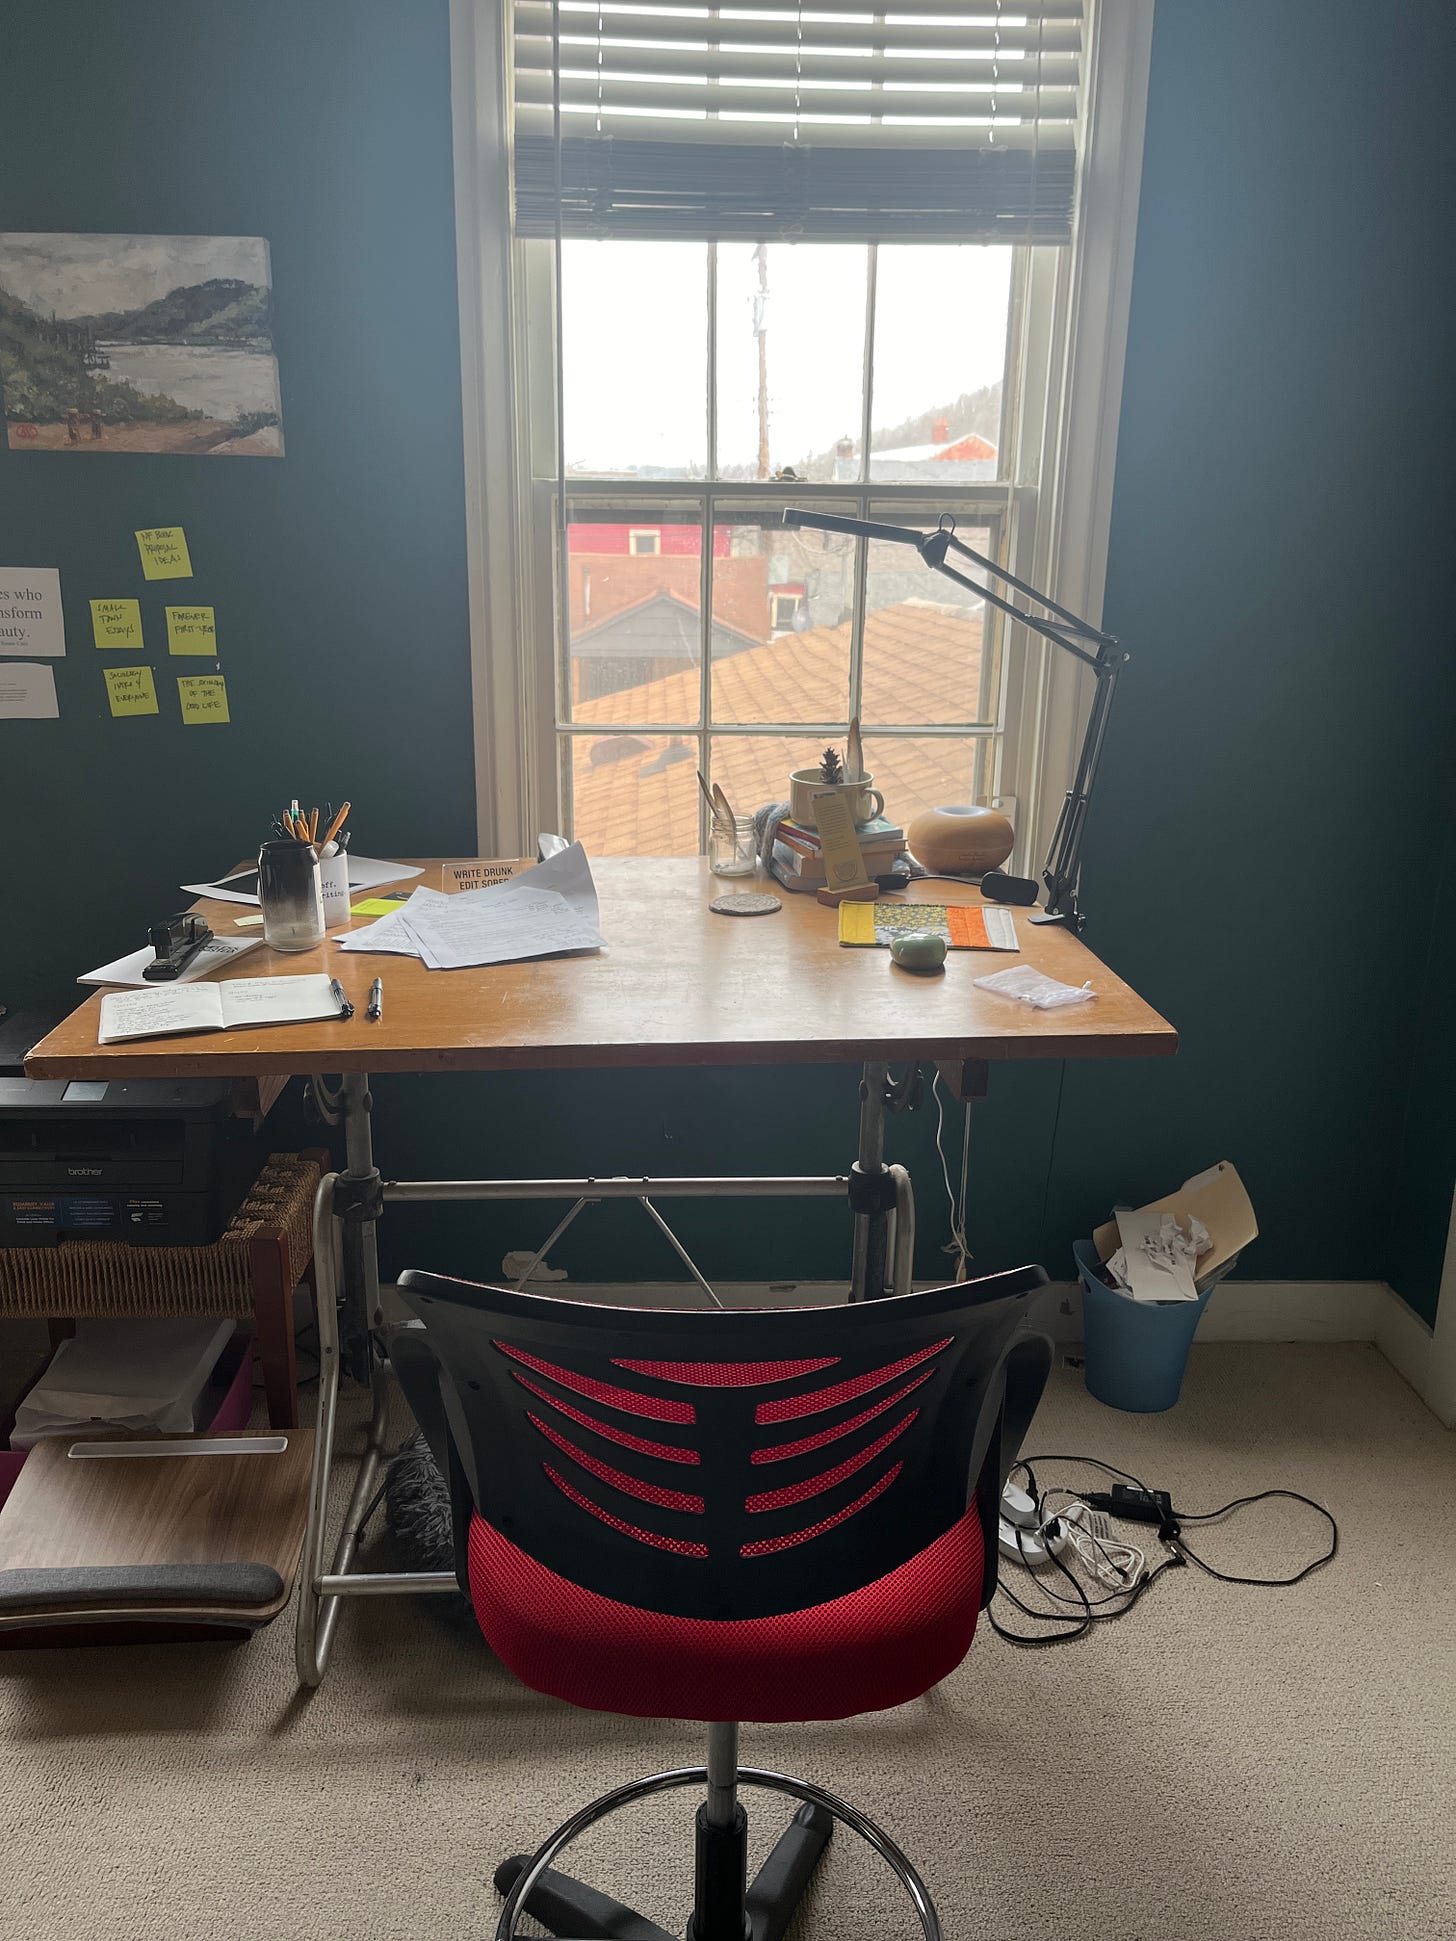 A drafting table sitting in front of a window with the red chair and a view of buildings out the window